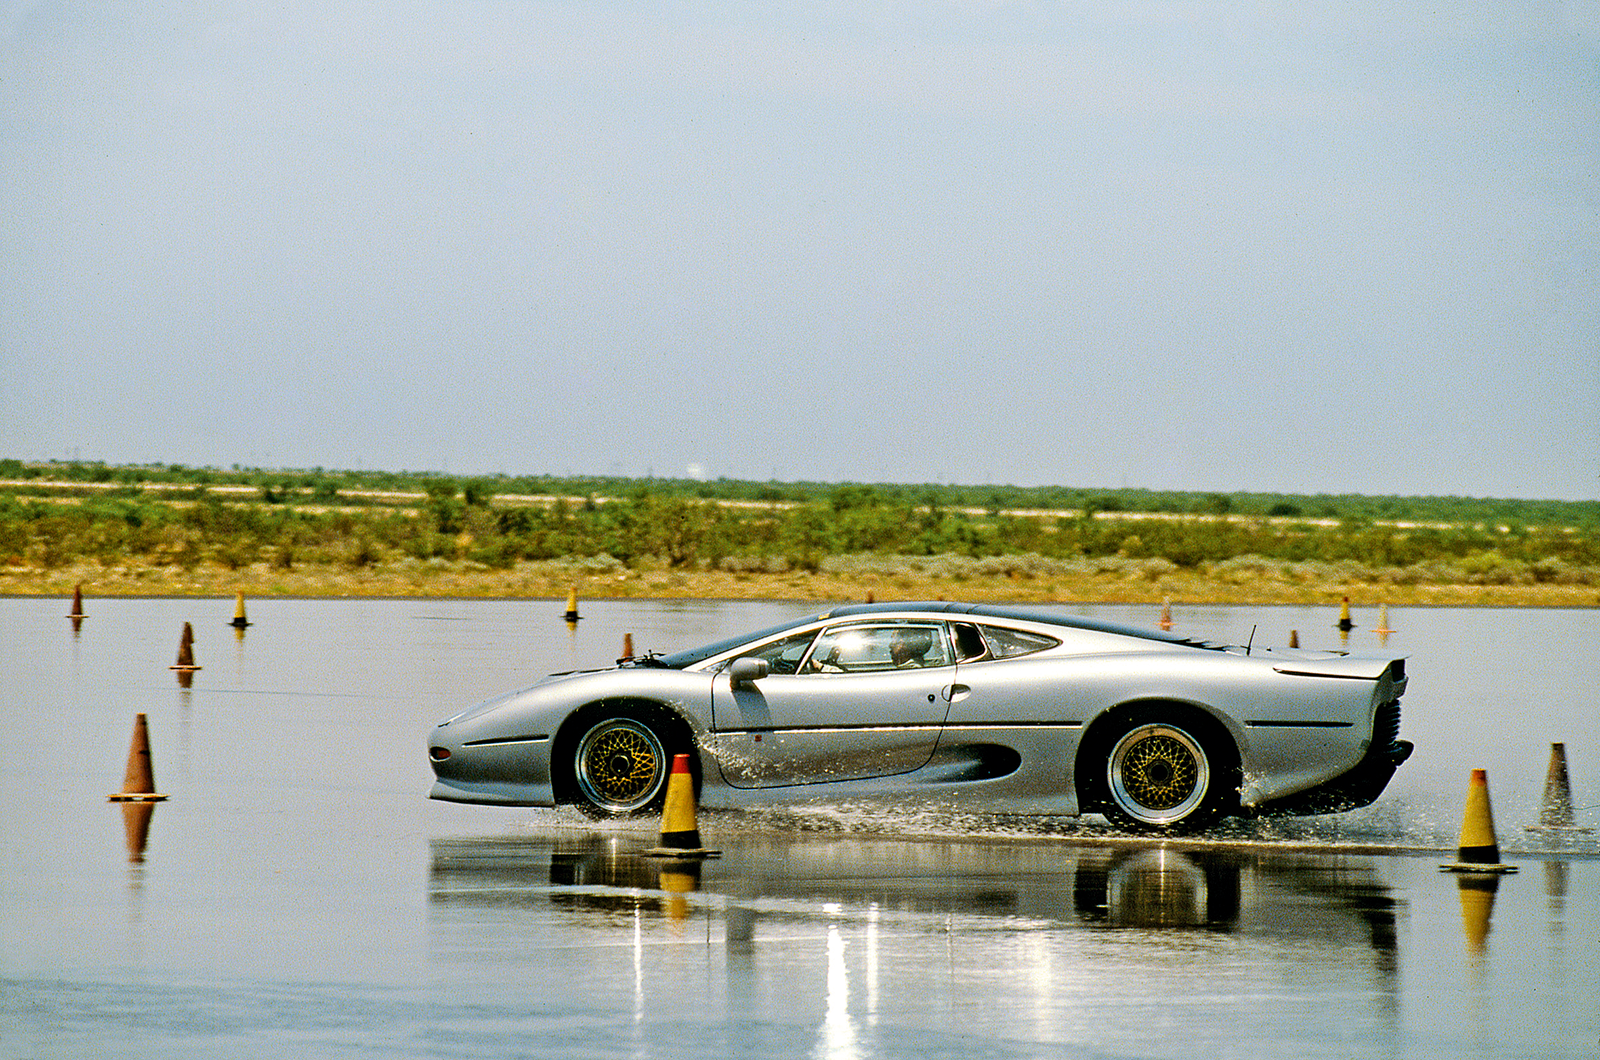 Classic & Sports Car – Before the wildest cat was tamed: driving a rare Jaguar XJ220 prototype